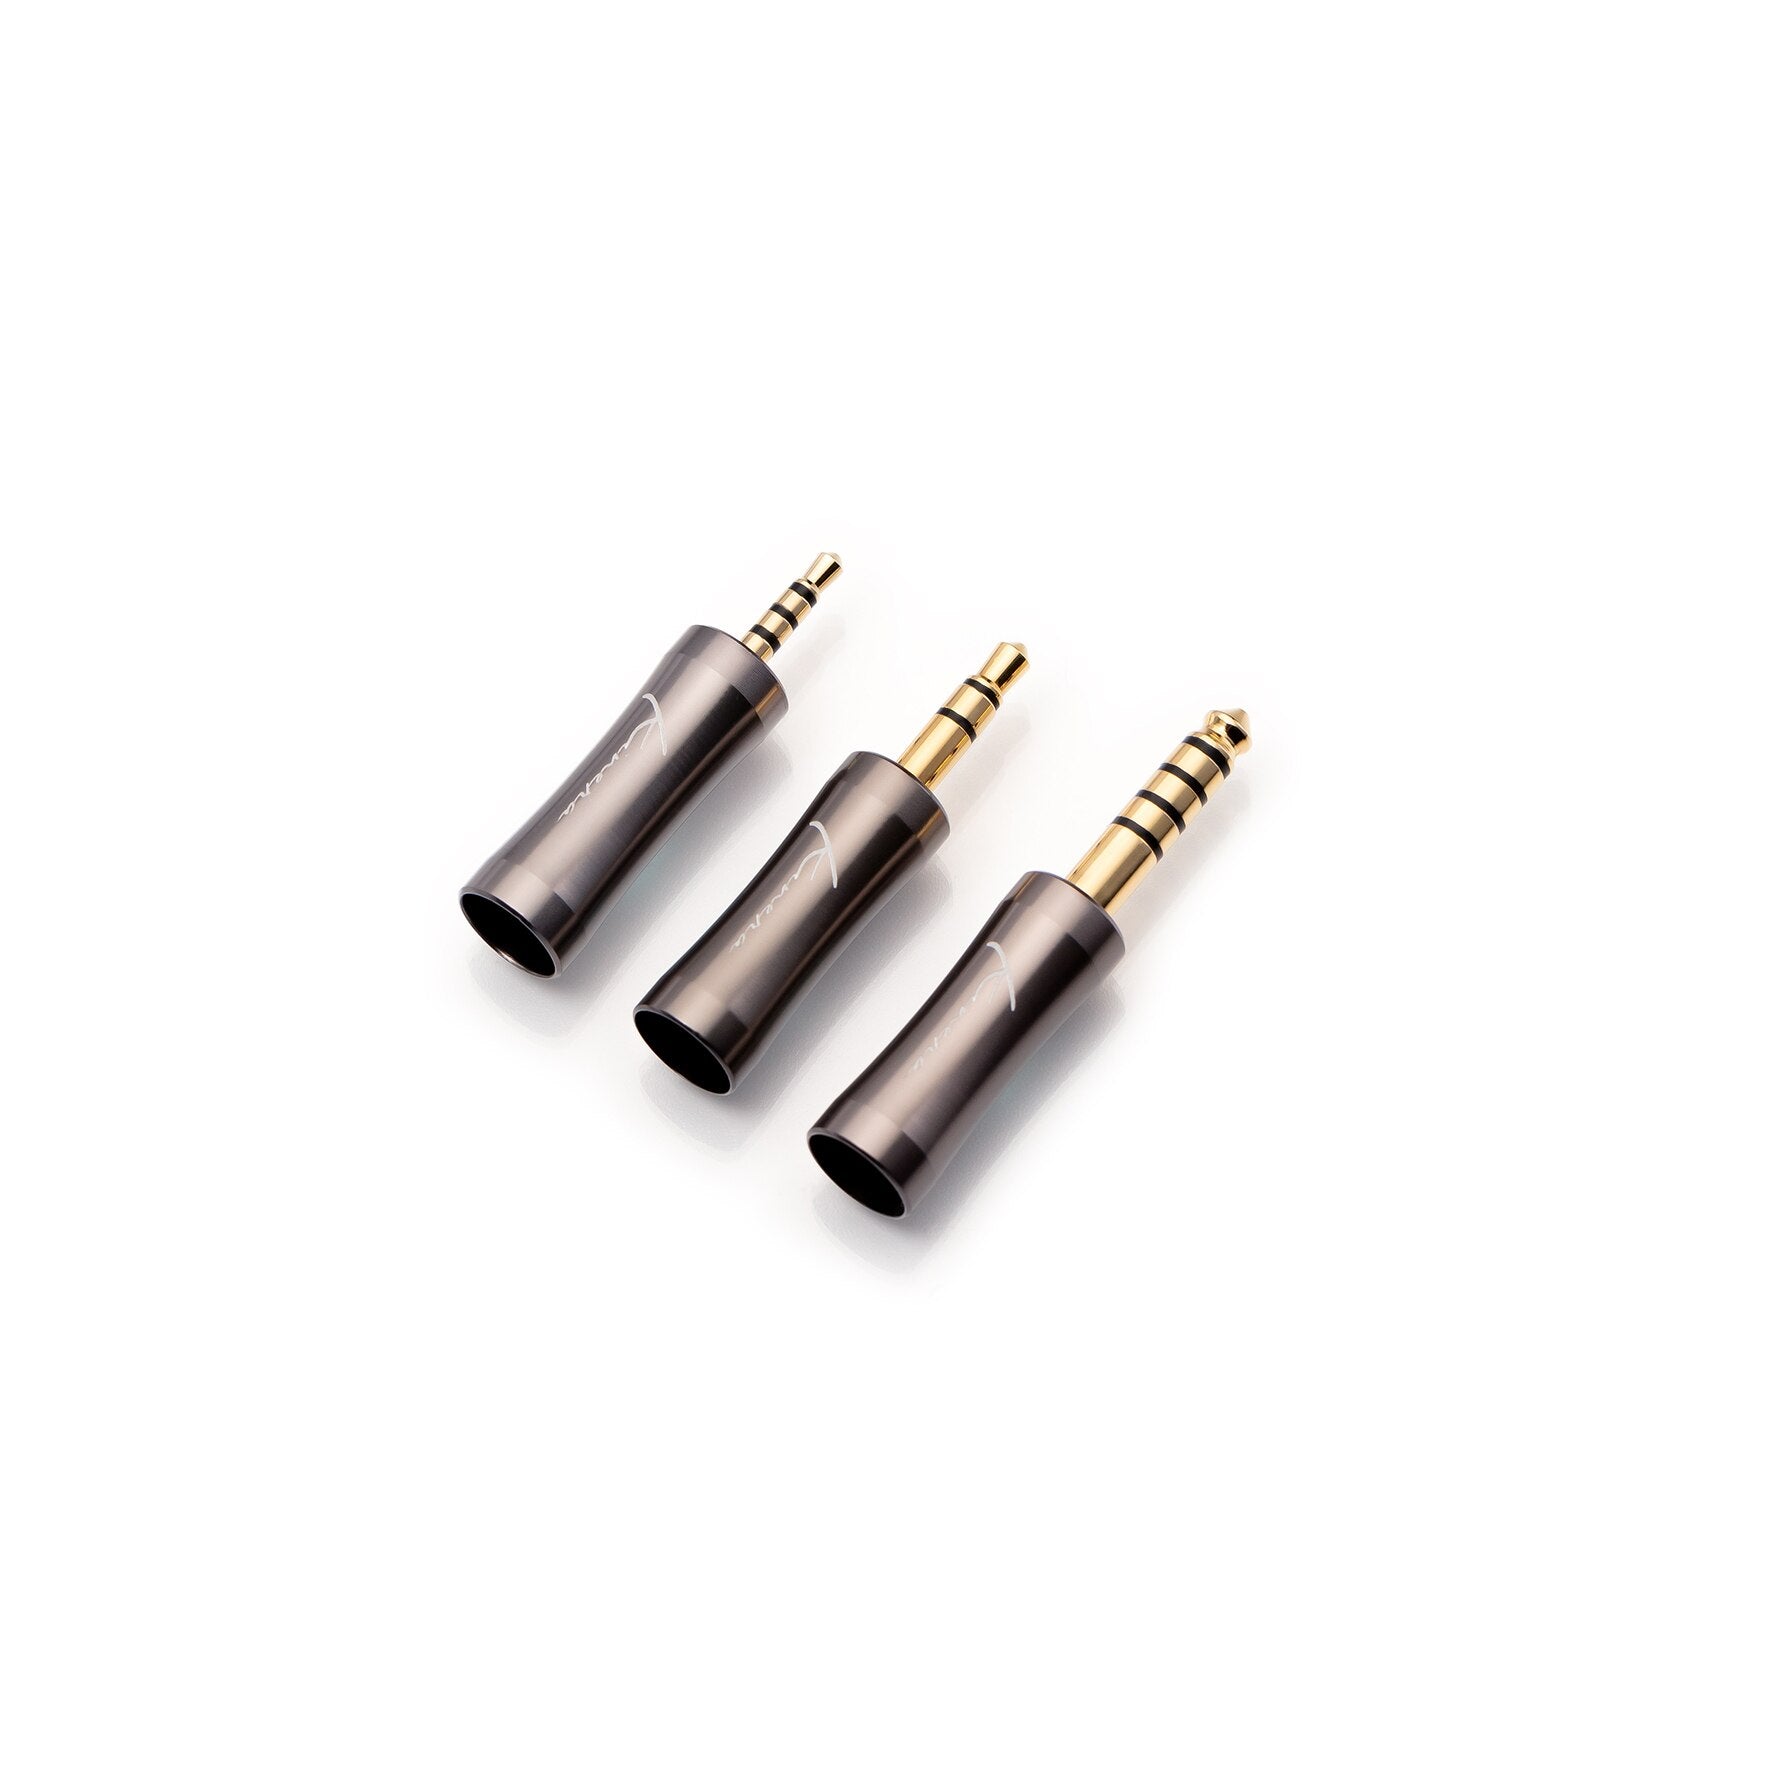 Kinera Leyding Modular Upgrade Cable (2.5+3.5+4.4),OFC+Alloy copper with 5N silver plated, 8 core,0.78 2pin / MMCX connector - The HiFi Cat